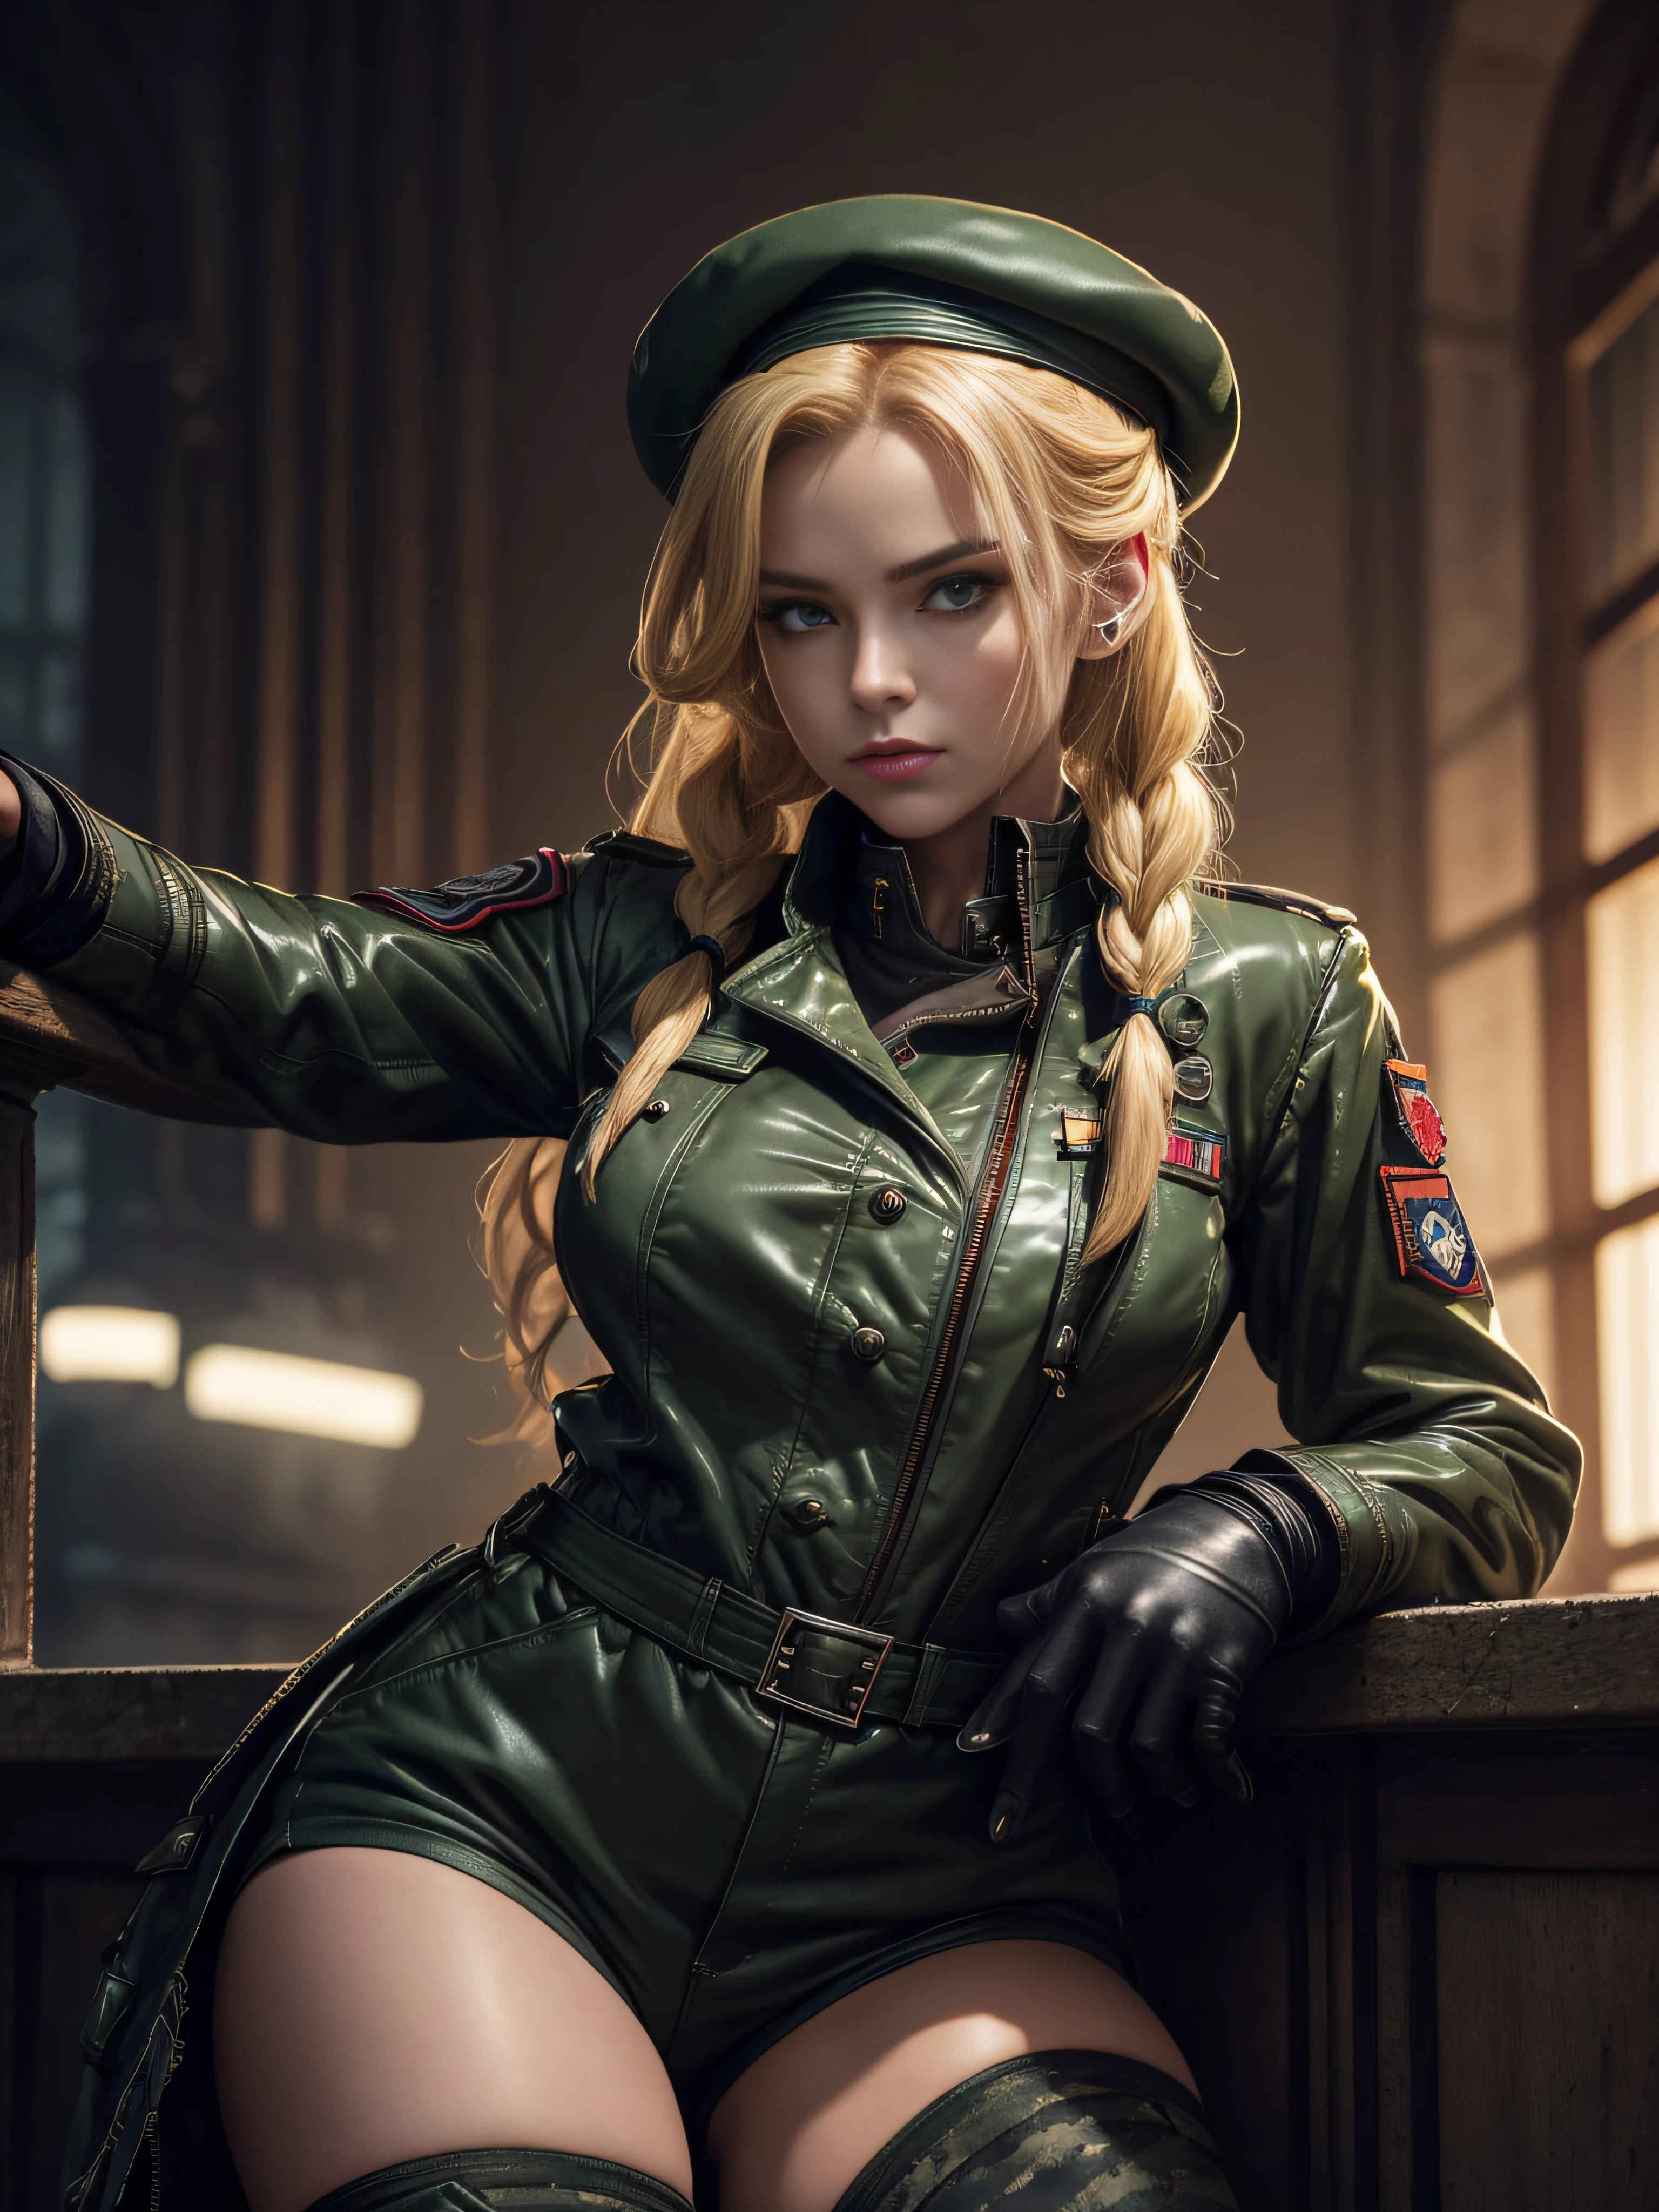 "(exquisitely detailed CG unity 8k wallpaper, masterpiece-quality with stunning realism), (best illumination, best shadow), (best quality), (elegant and demonic style:1.2), Arti modern anime. angled view, heroic pose, closeup full body portrait of stunningly beautiful cammy from street fighter, Masterpiece, best quality, highres, mature Cammy white, twin braids, long hair, blonde hair, antenna hair, beret, (red headwear:1), blue eyes, scar on cheek, green military croptop, green military shorts, red gloves, fingerless gloves, camouflage, (fully clothed:1), abs, depth of field blur effect, night, full zoom, action portrait, photorealistic. cinematic lighting, highly detailed. best quality, 4k, Better hand, perfect anatomy, leaning forward, foreshortening effects, coy flirty sexy expression, foreshortening effect, (piercing eyes:0.8), surrounded by an ominous and dark atmosphere, accentuated by dramatic and striking lighting, imbued with a sense of surreal fantasy". wearing laced military boots:1.5), (in MI6 headquarters:1) (wearing a British Military jacket:1.5) (mature:0.5) (military pose:0.5)